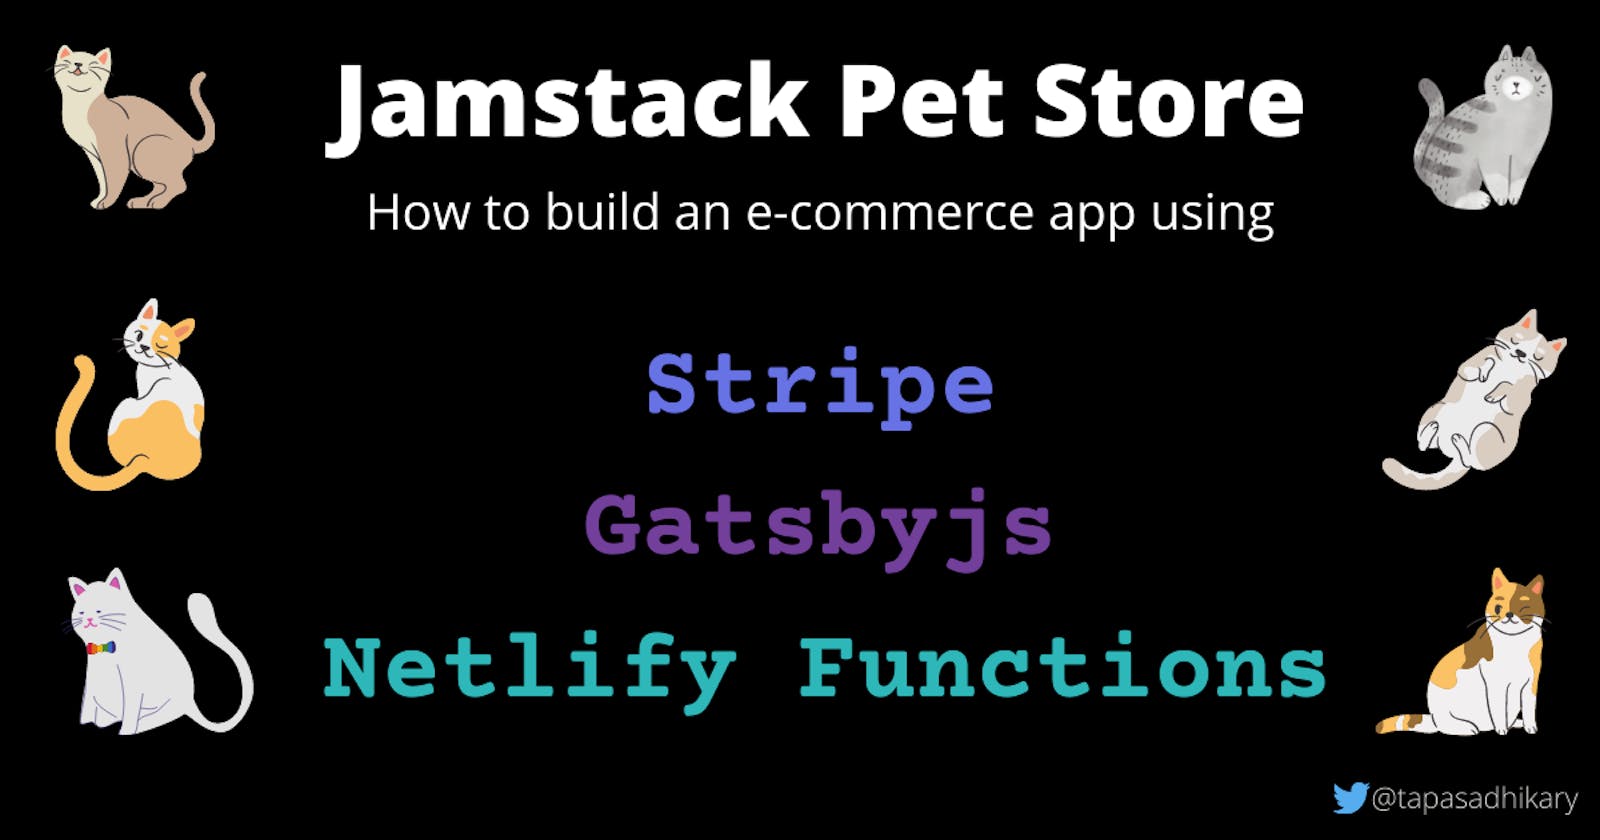 How to create a Jamstack pet store app using Stripe, Gatsbyjs, and Netlify functions